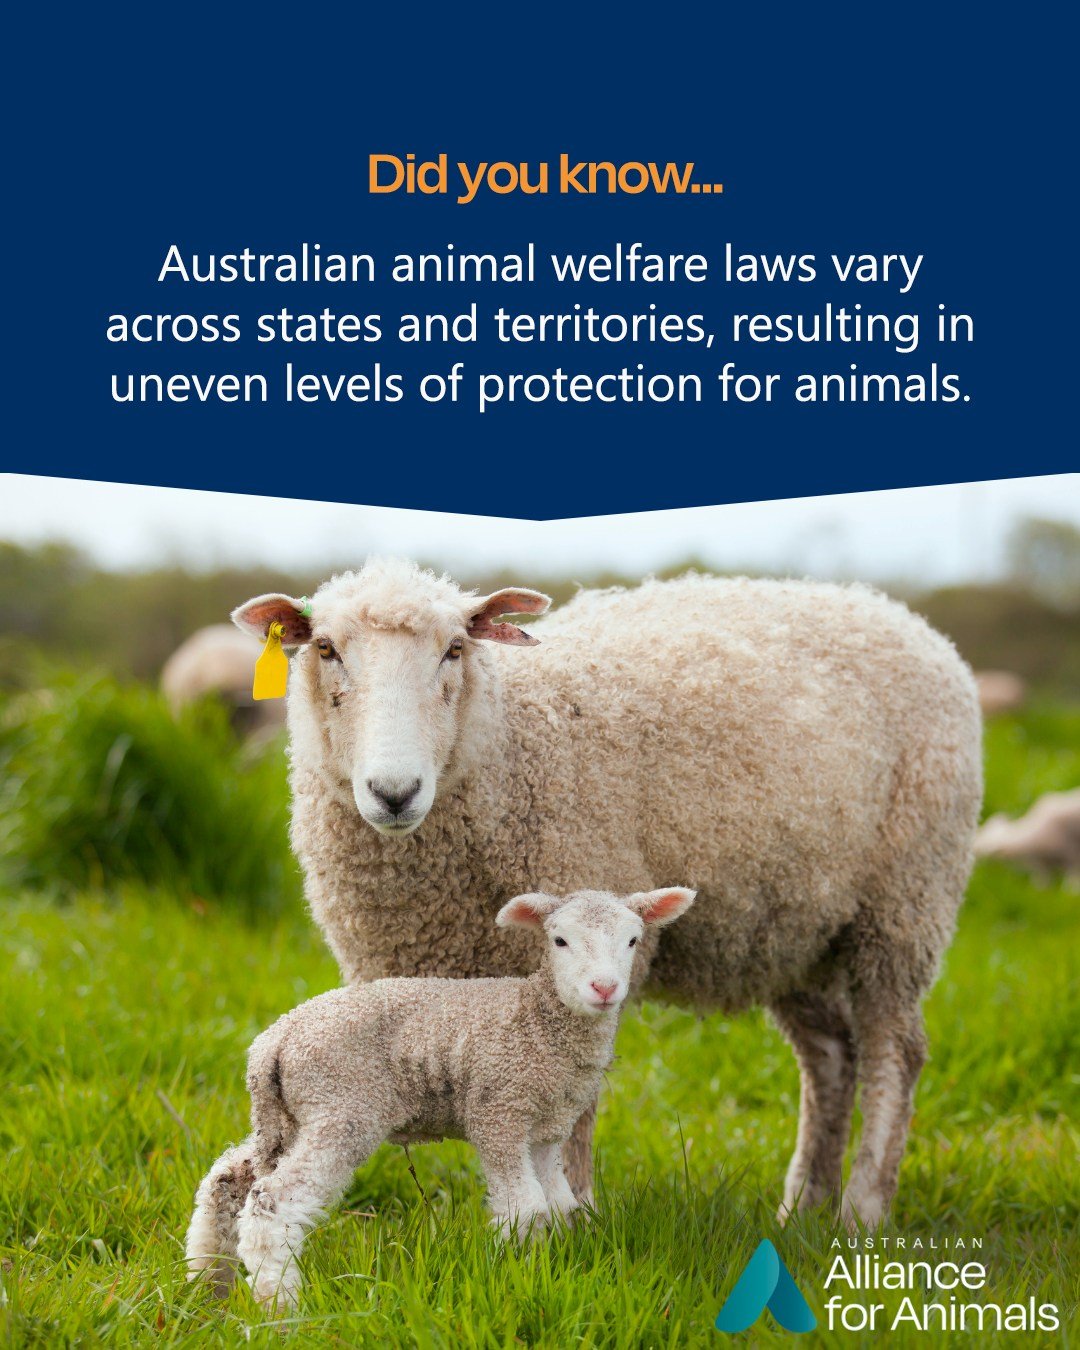 Each state and territory in Australia operates under its own set of animal welfare laws, creating a fragmented regulatory environment that gives rise to disparities in the treatment of animals. These variations prevent the timely and consistent imple